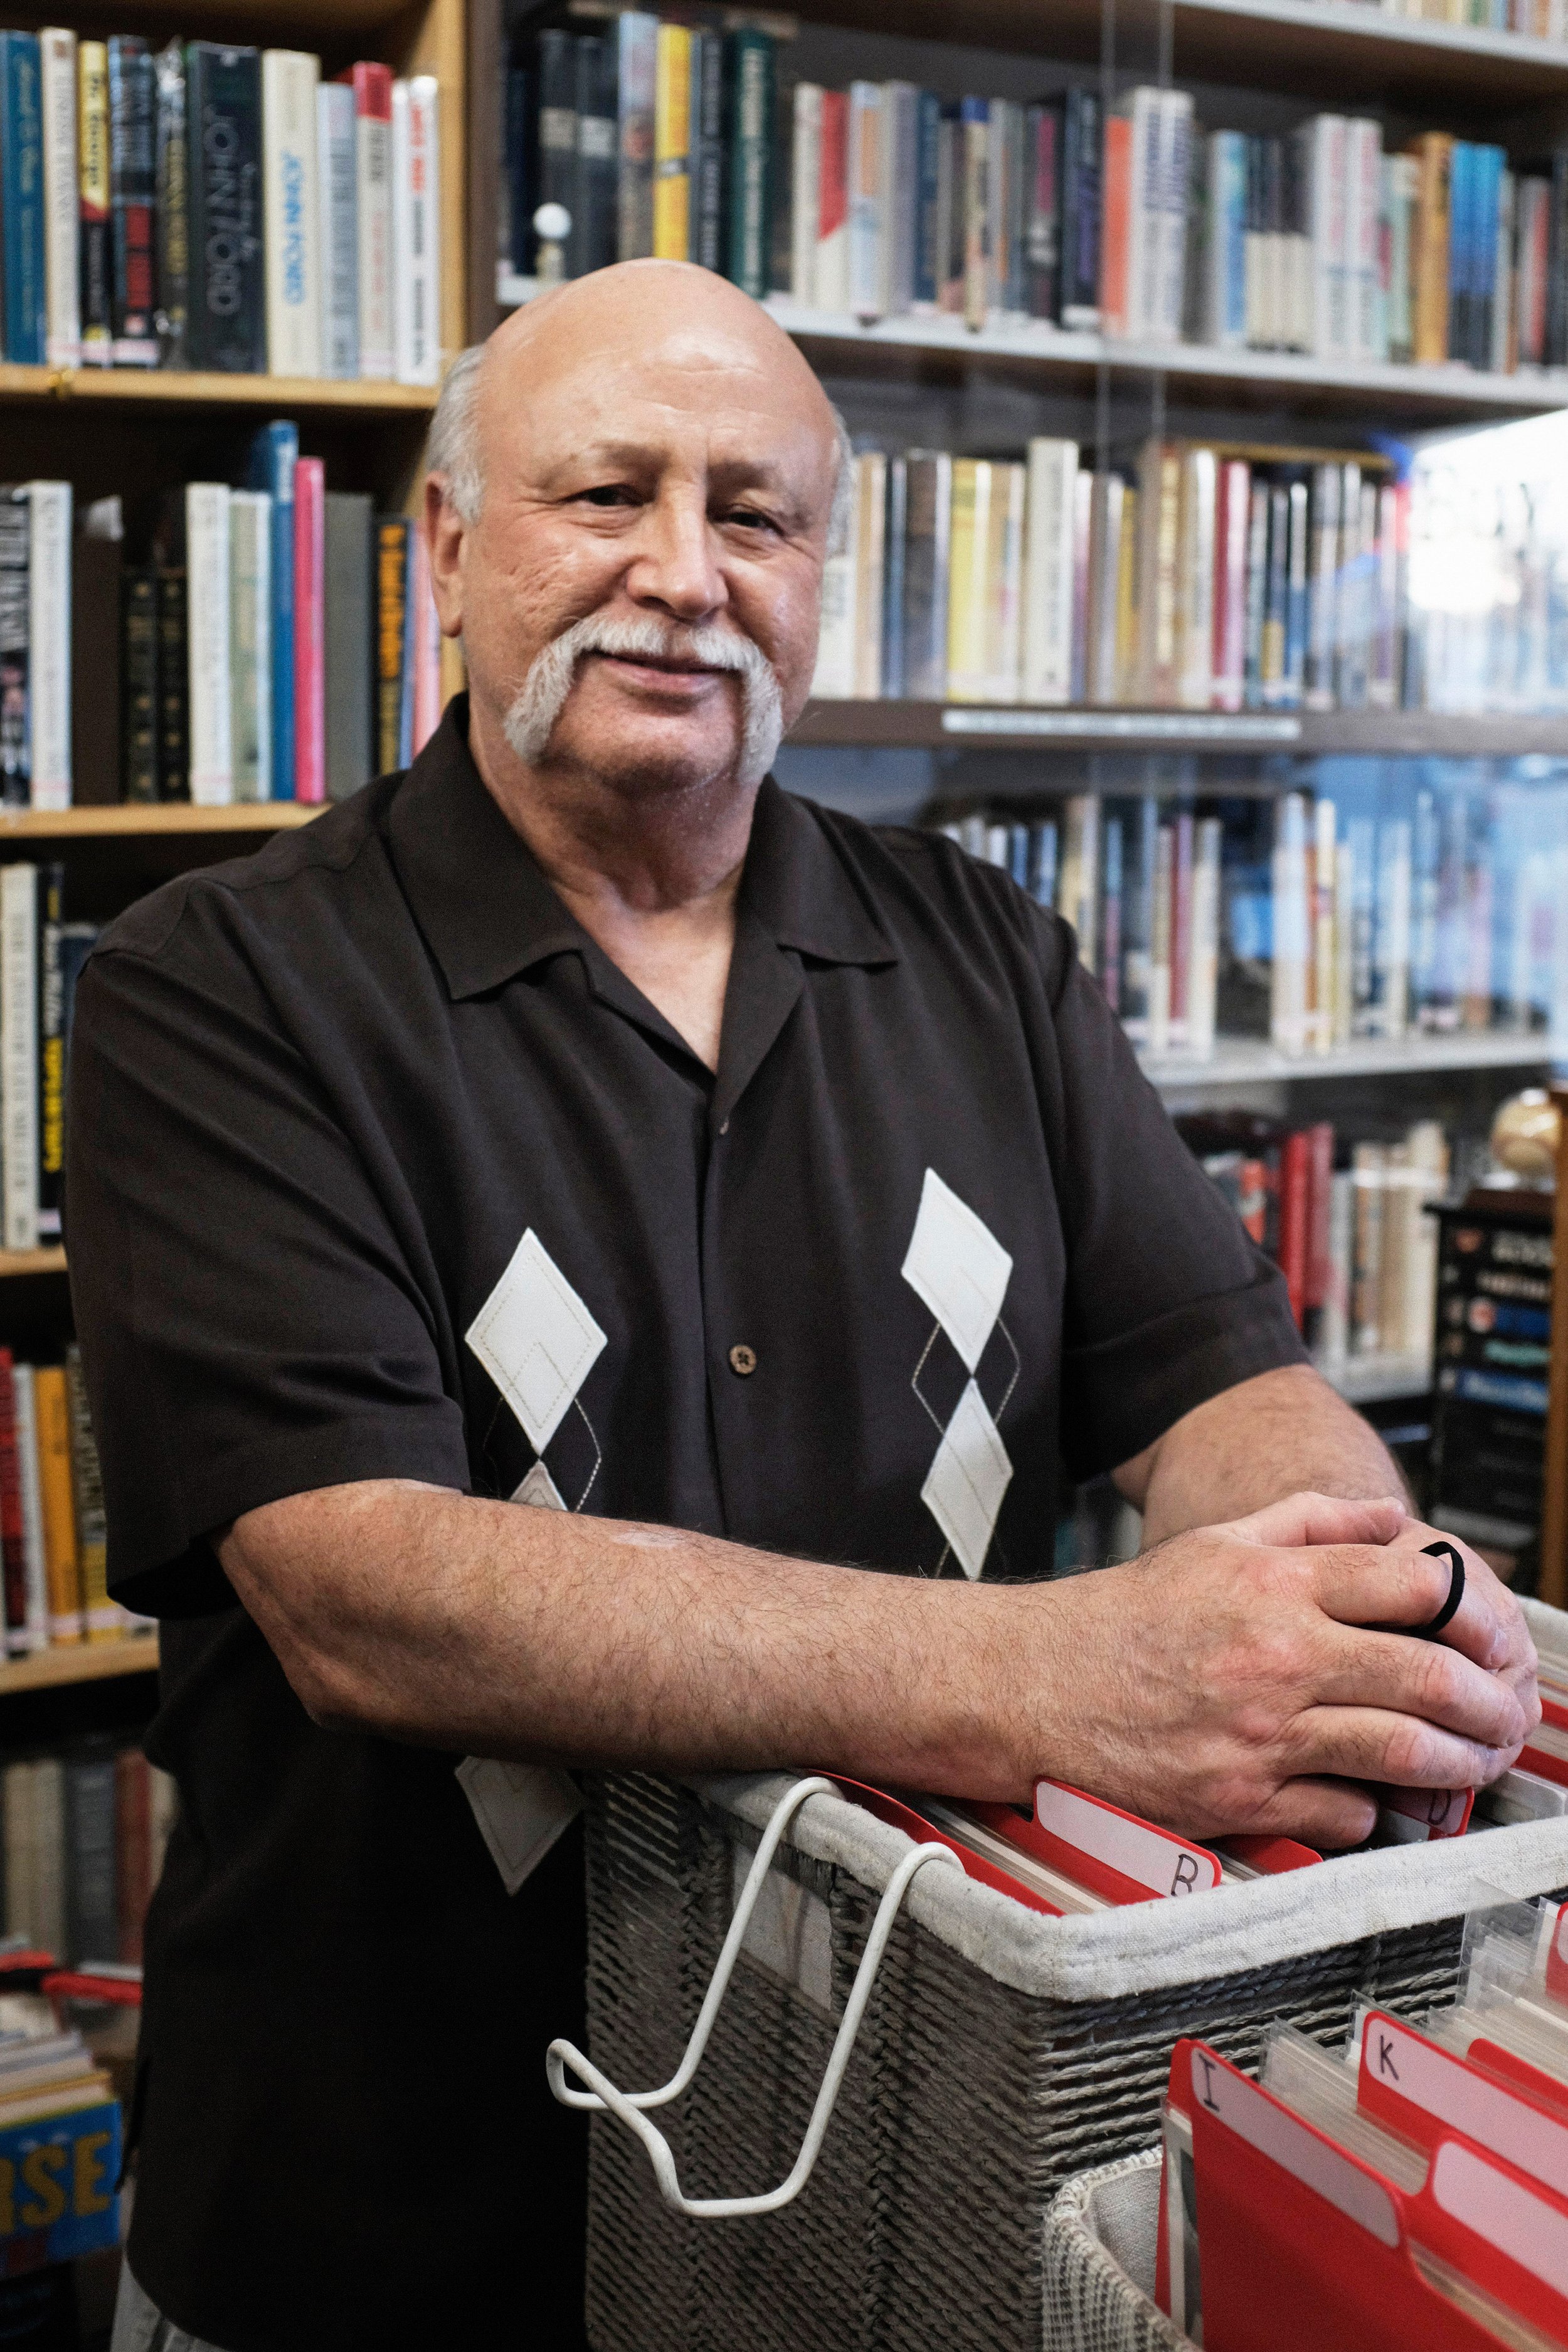  William A. Milano (cq) is a decade plus regular of David’s bookstore. Milano buys and sells rare first edition and signed books as an investment, and owns a signed Stanley Kubrick book as well as two signed Albert Einstein books. David Kaye Bookstor